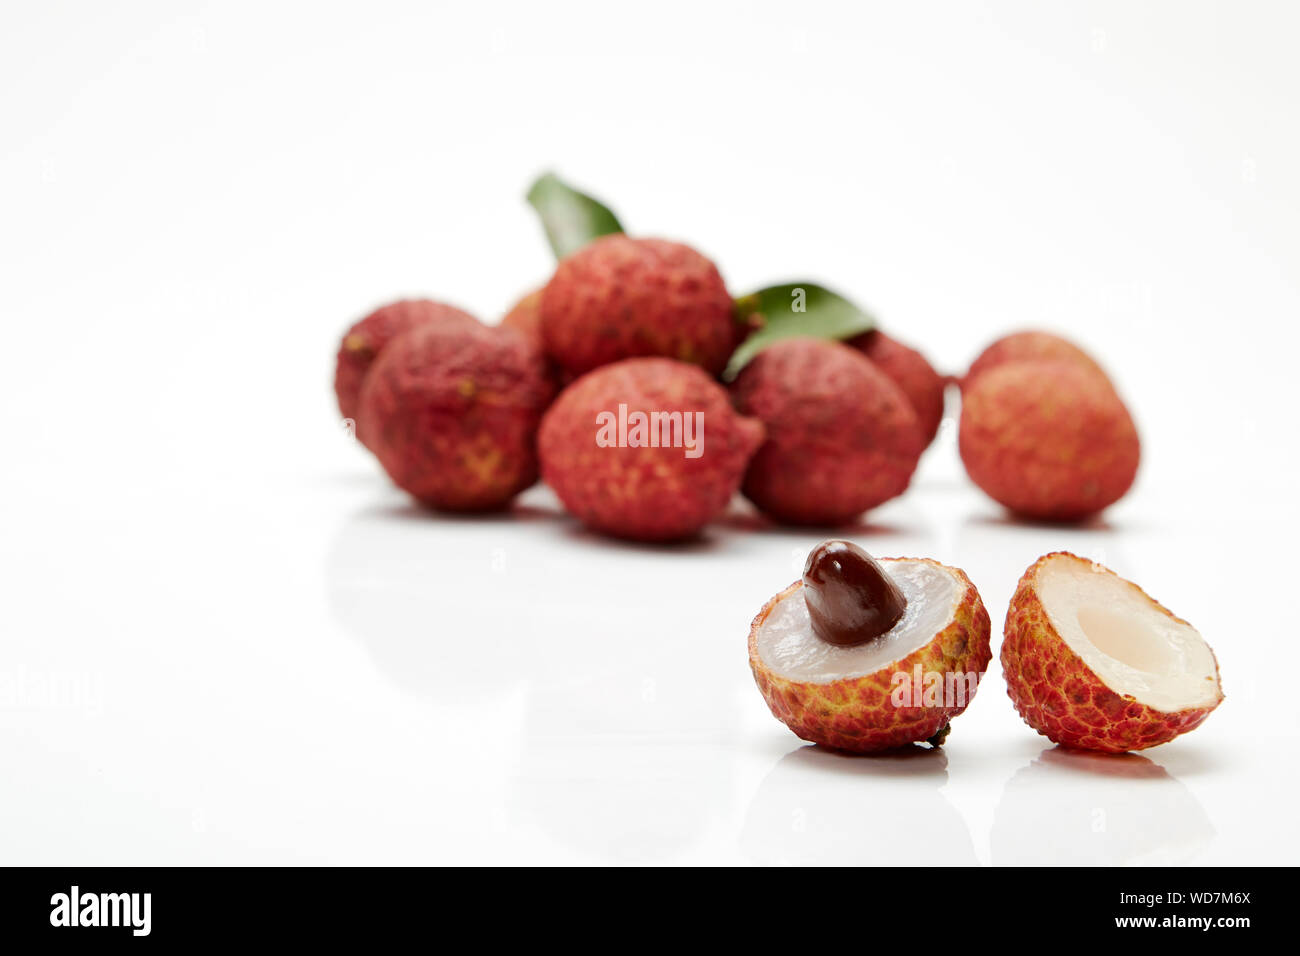 Close-up Of Lychee Against White Background Stock Photo